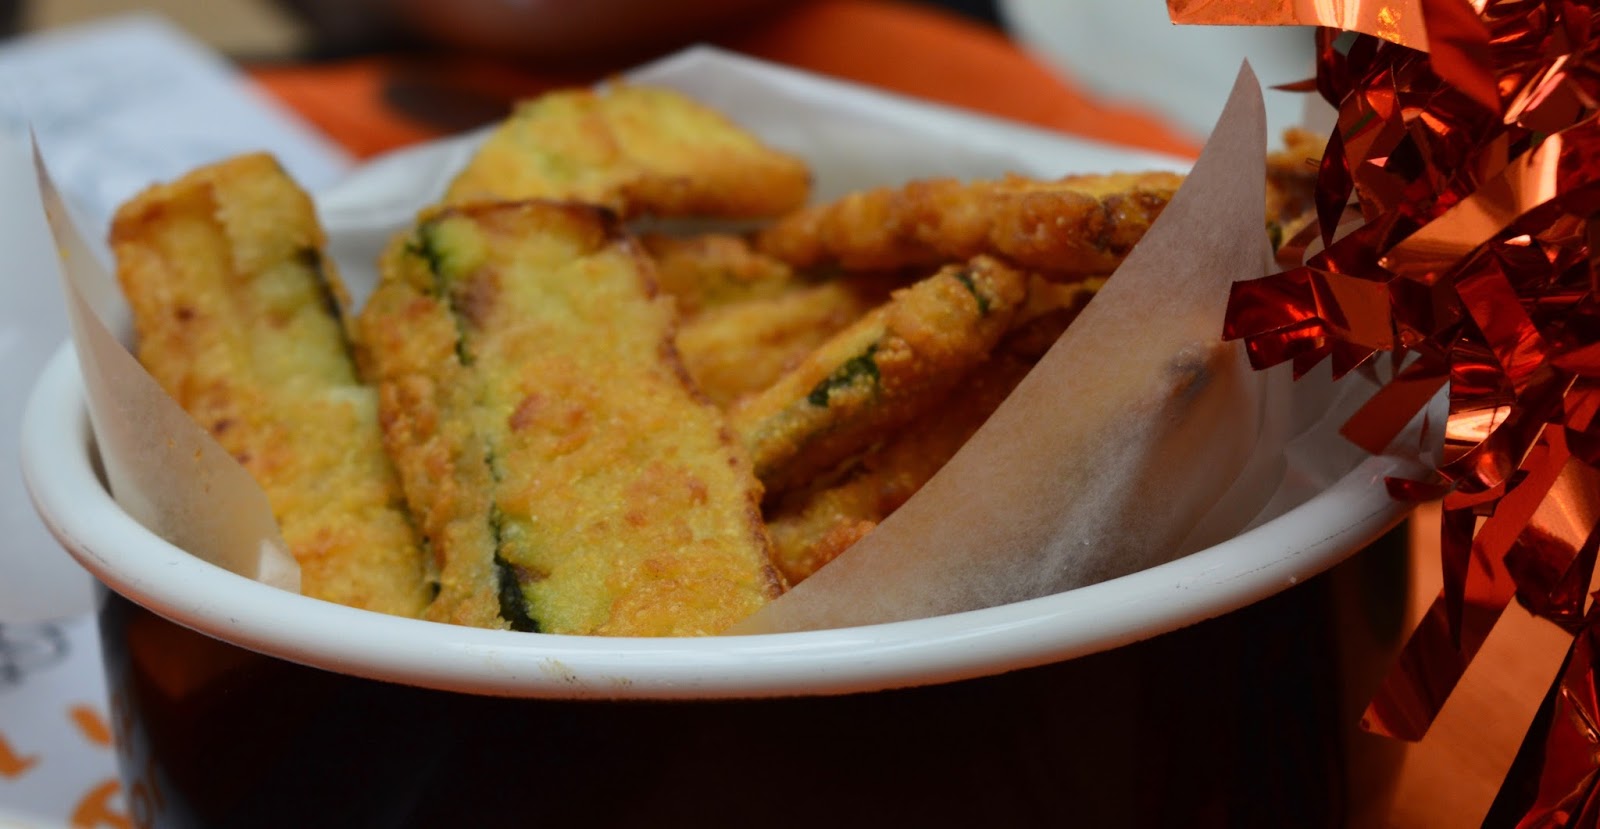 Our Guide to Family Restaurants & Children's Menus at intu Metrocentre  - Courgette Fries - Byron